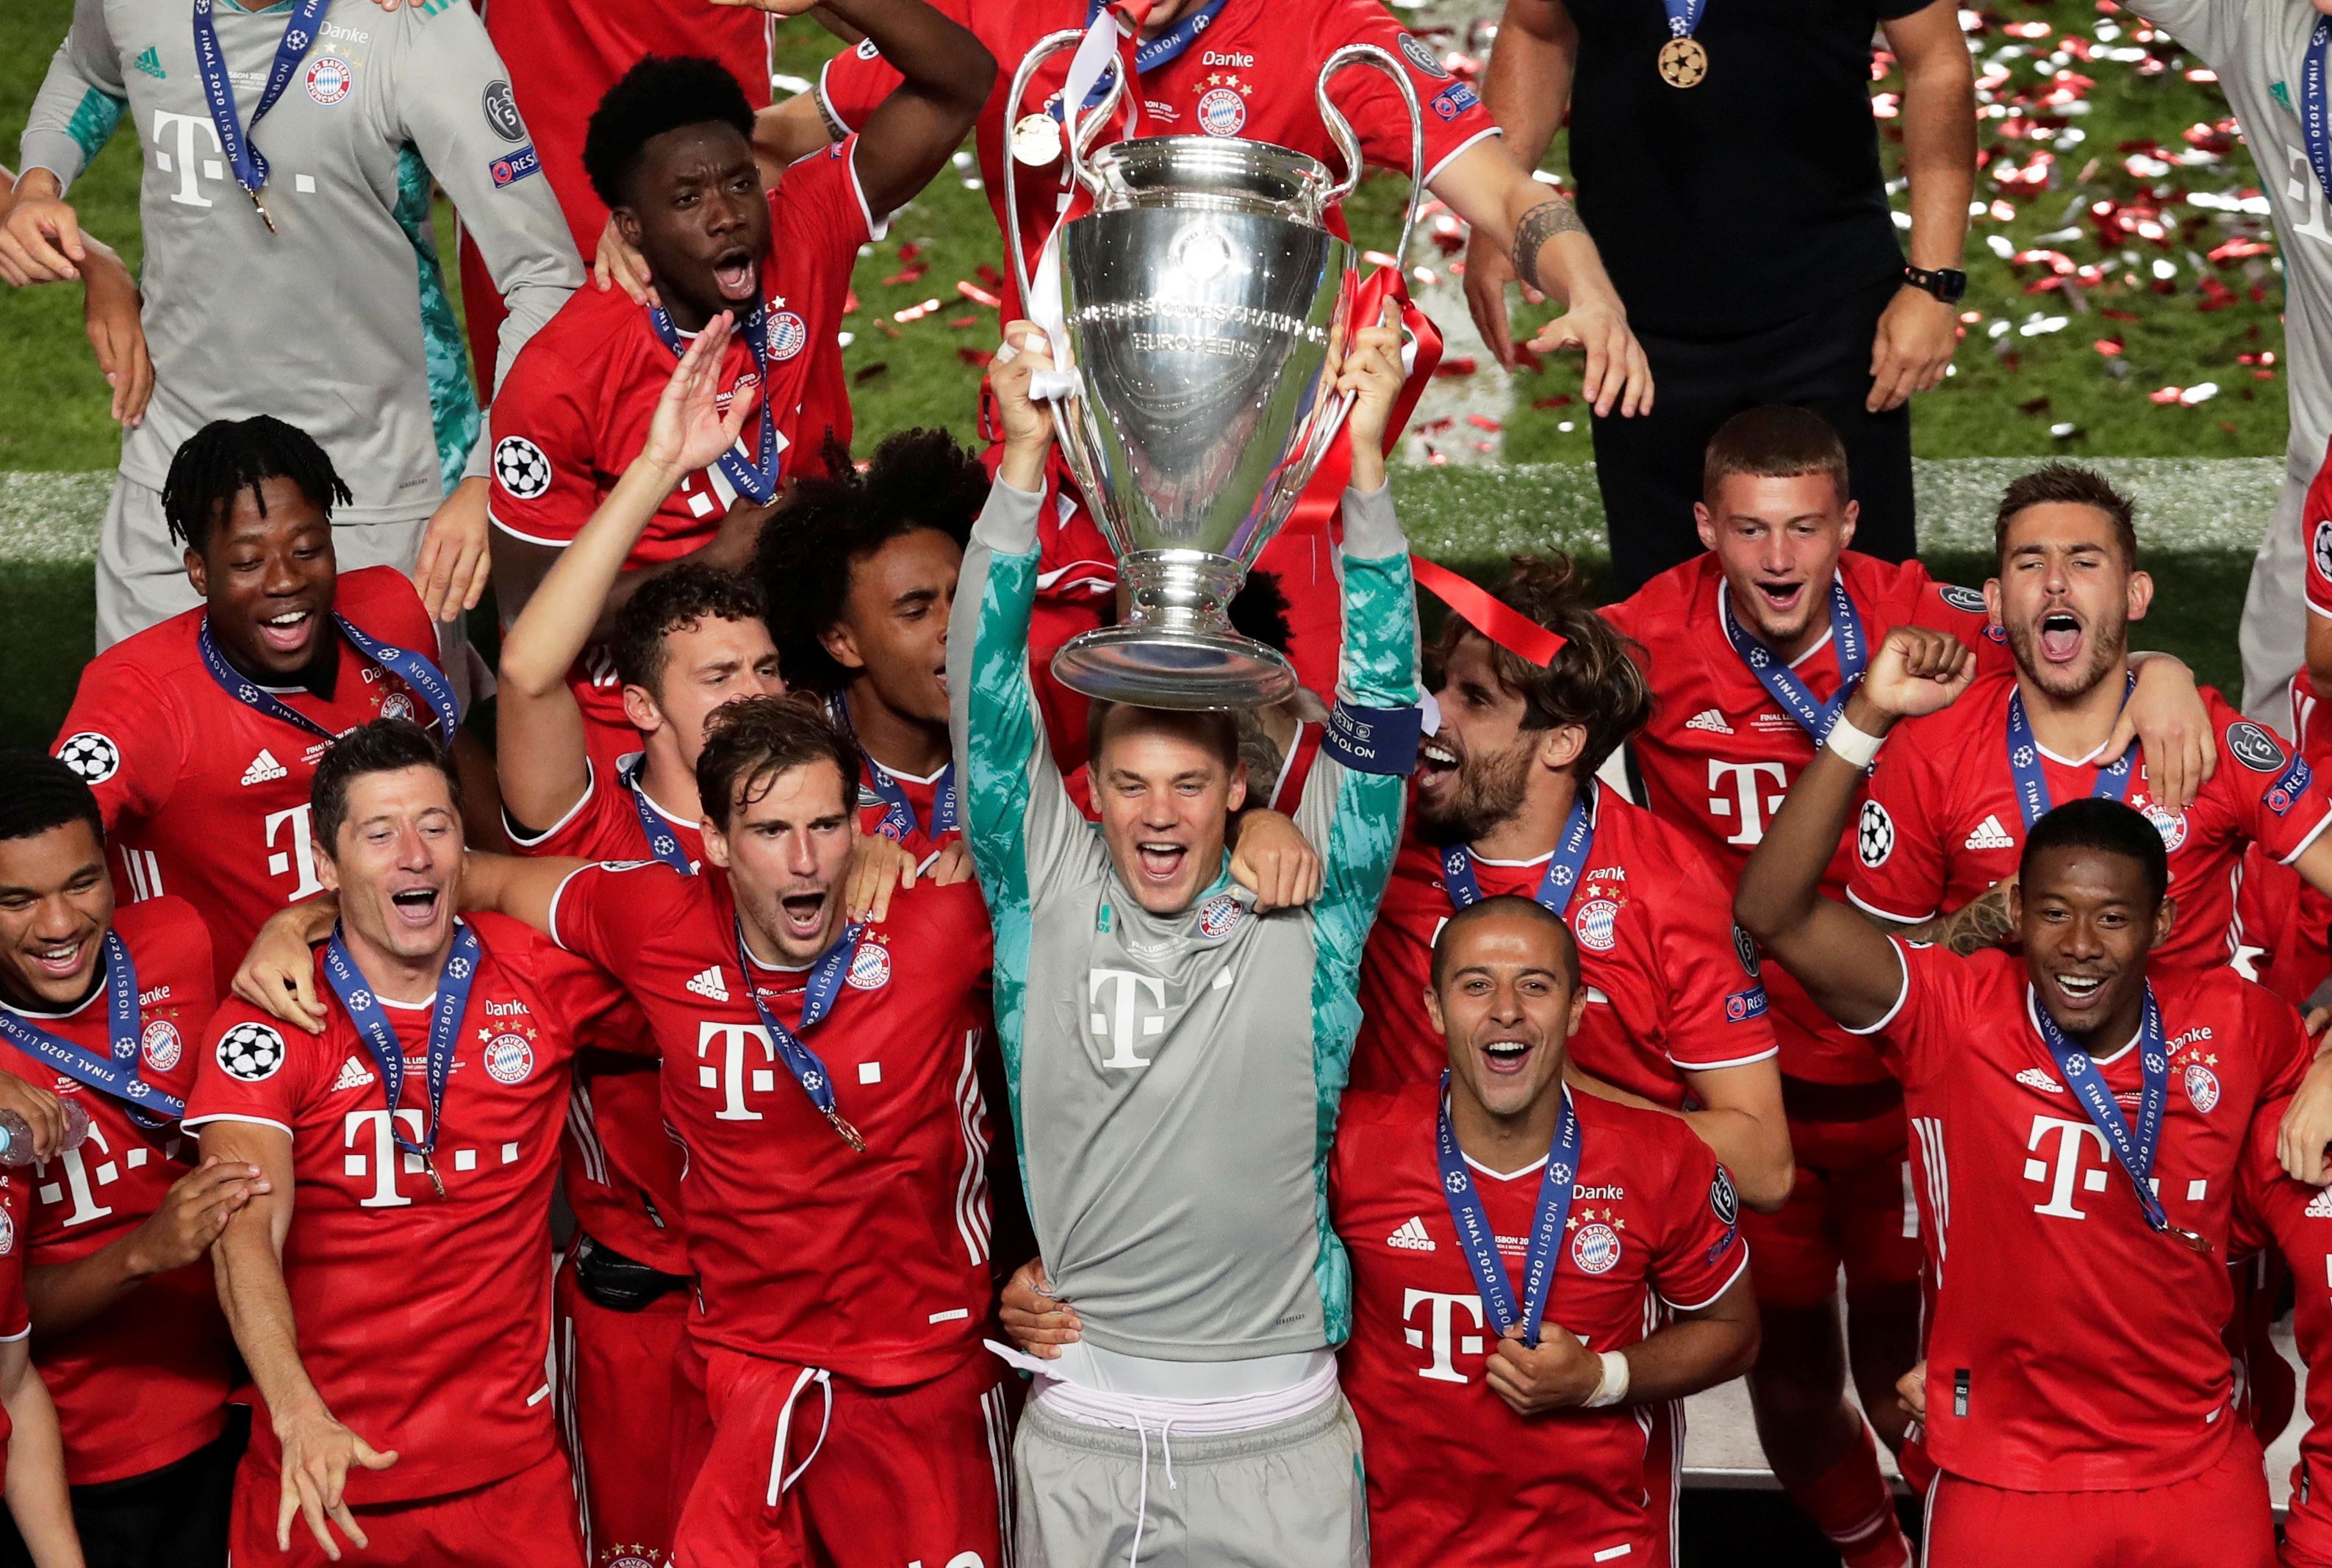 Bayern's Neuer lifts the Champions League trophy.